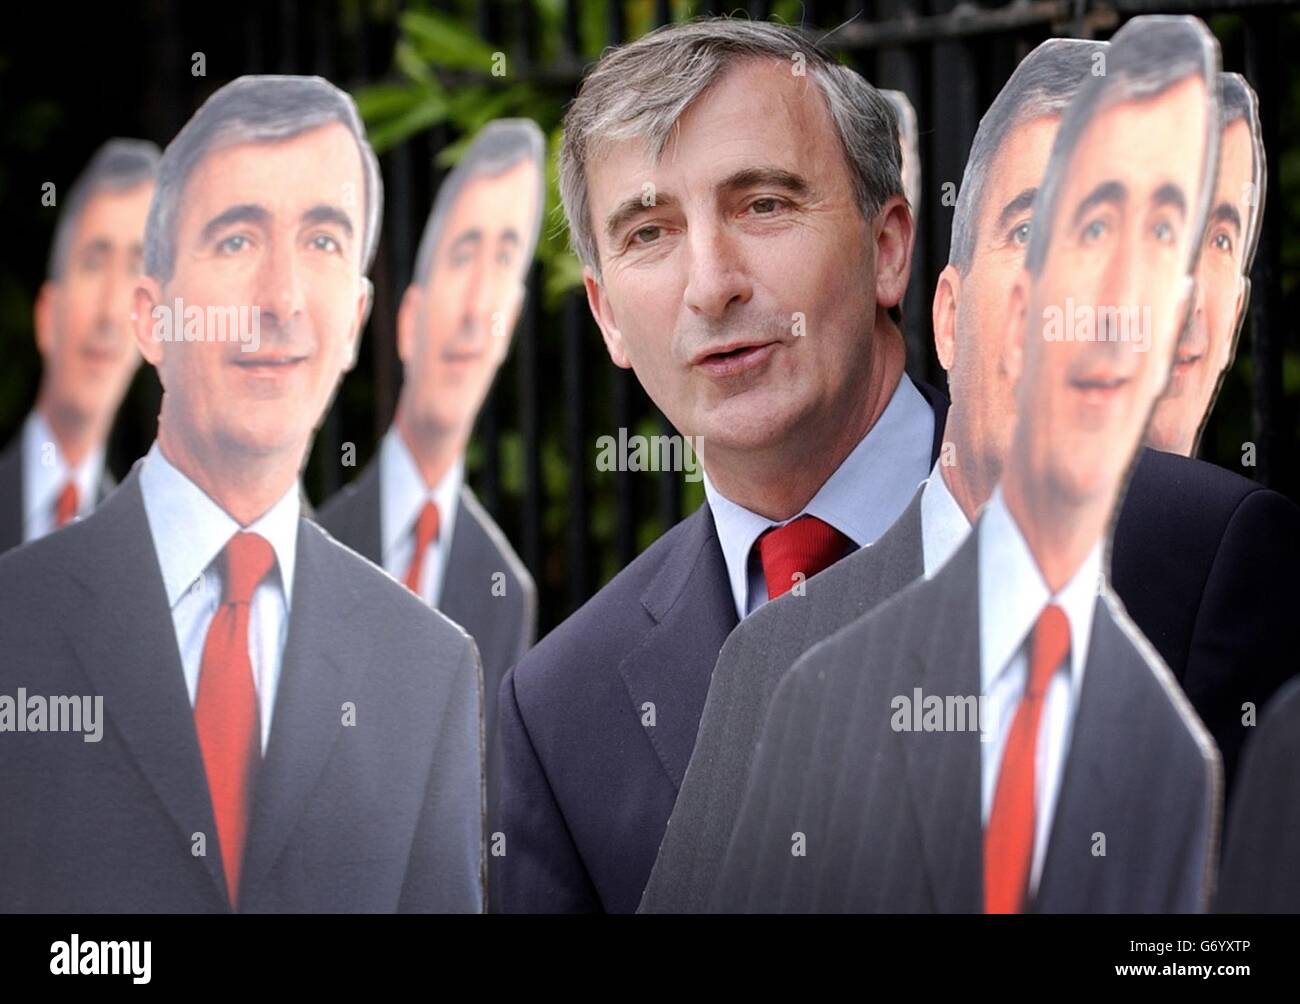 Fine Gael candidate in the forthcoming European elections Gay Mitchell, stands amongst 25 life-size cut outs of himself in Dublin, which will be positioned as part of his campaign at DART Stations, bus stations and canal bridges in the Irish capital in the coming days. Stock Photo